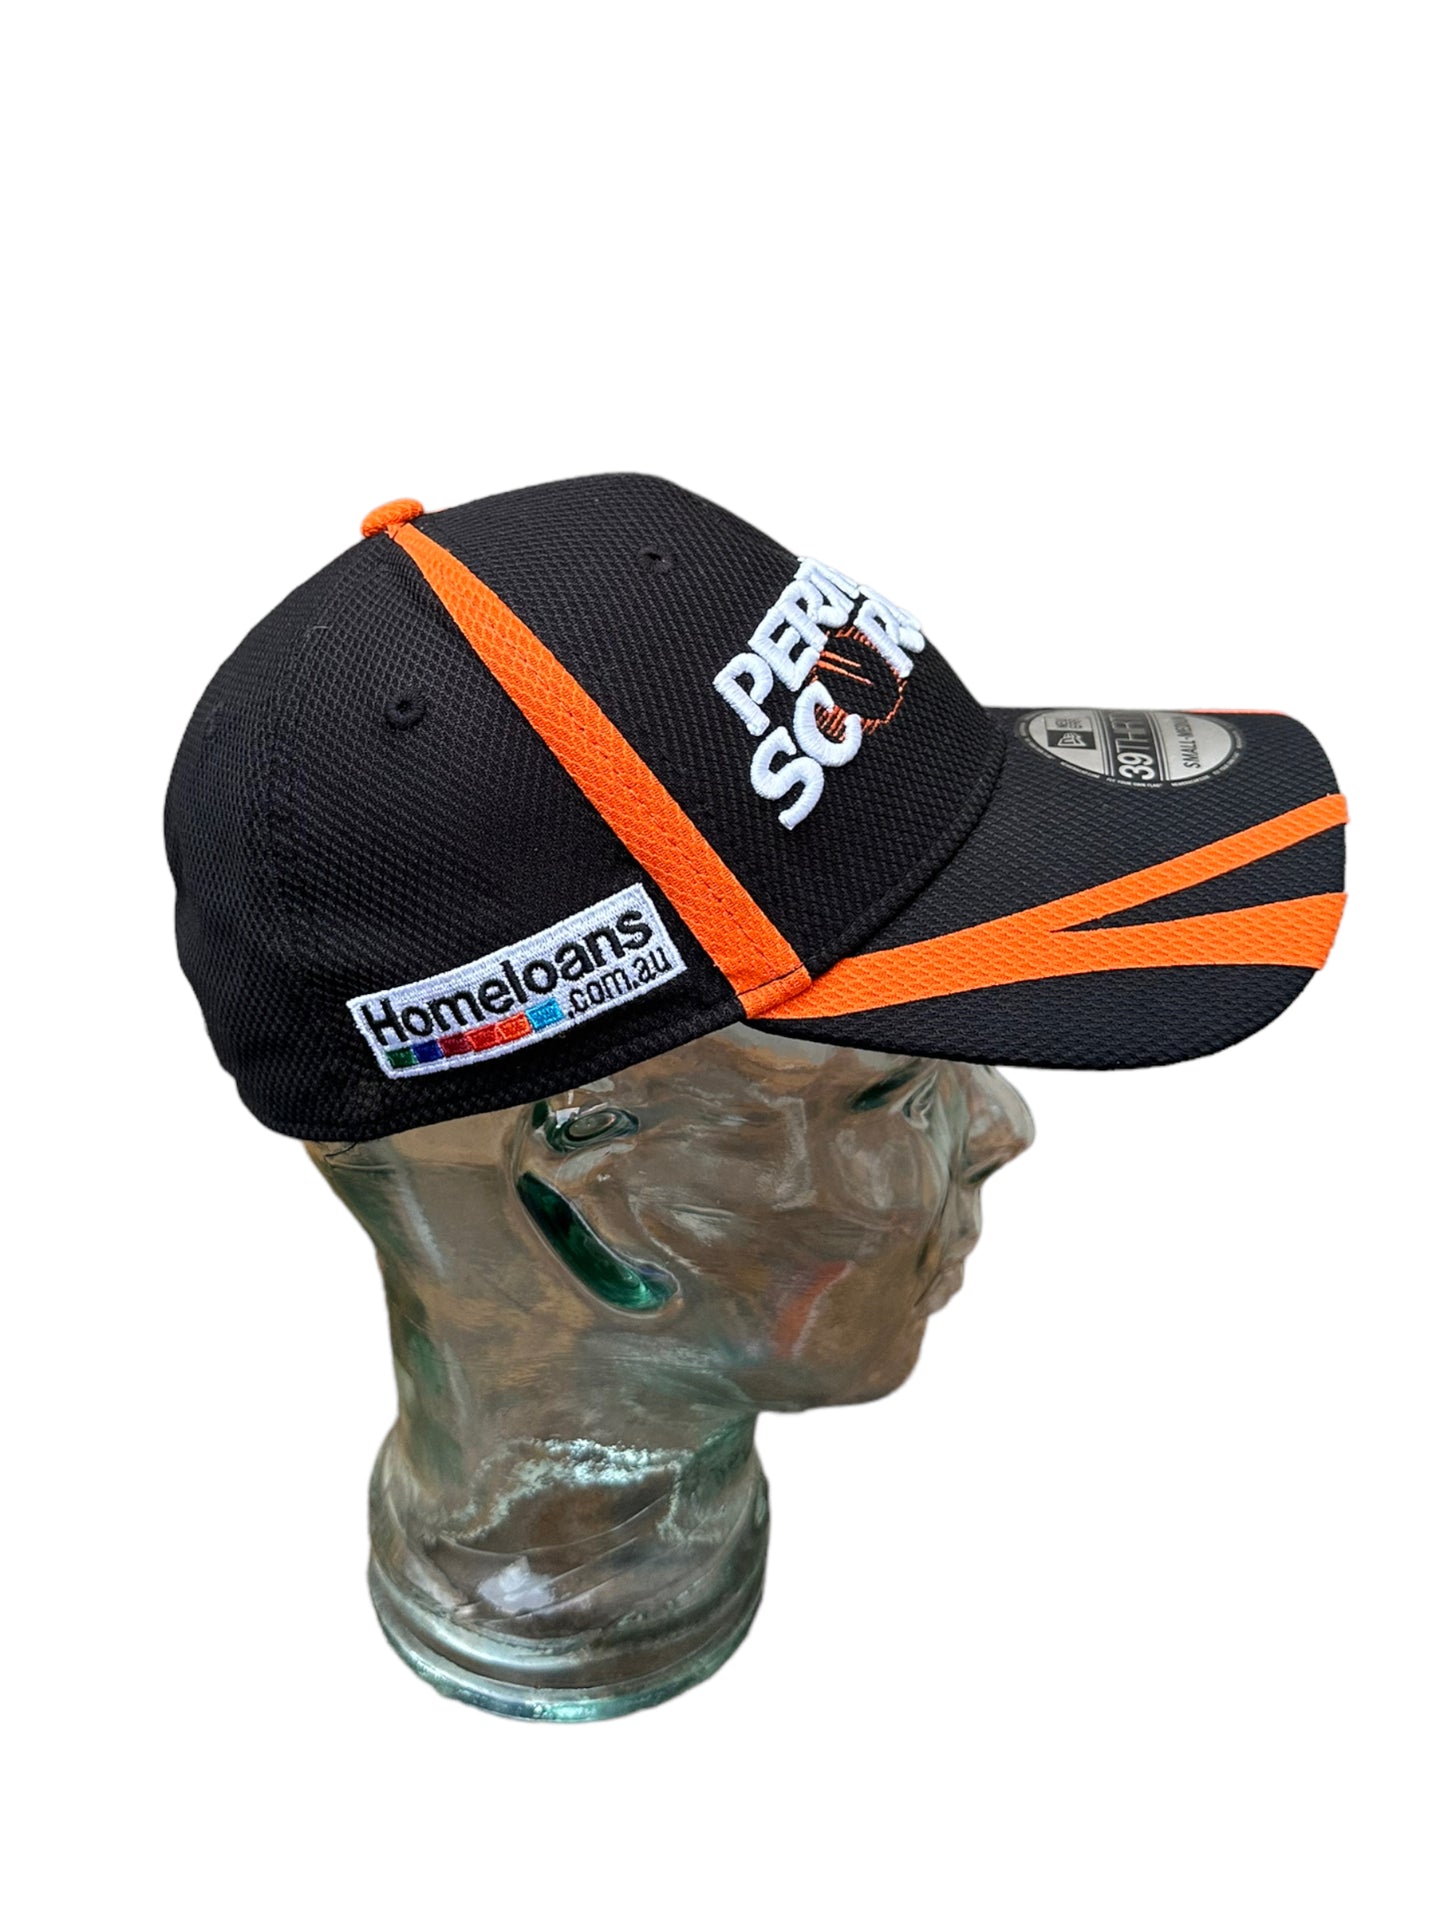 PERTH SCORCHERS FITTED HAT